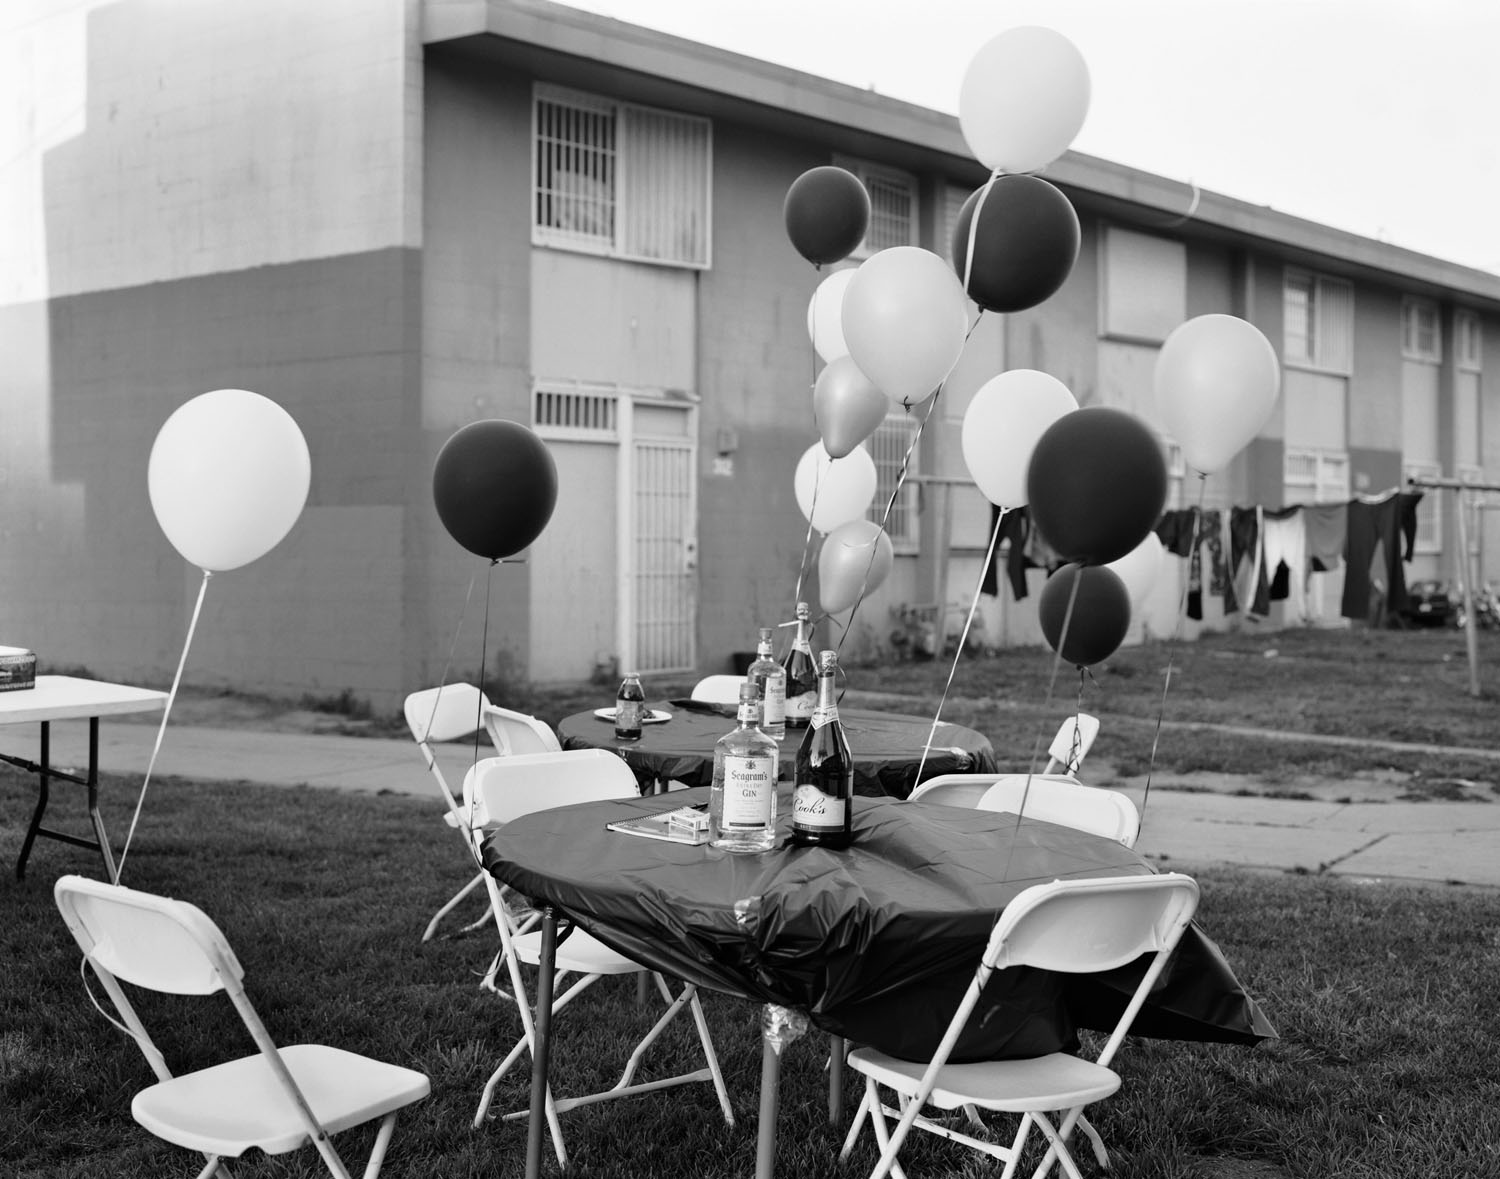 Dana Lixenberg, Untitled (Birthday party), 2009 Imperial Courts 1993 – 2015 Gelatin silver print © Dana Lixenberg | Courtesy of the Artist and GRIMM, Amsterdam/New York